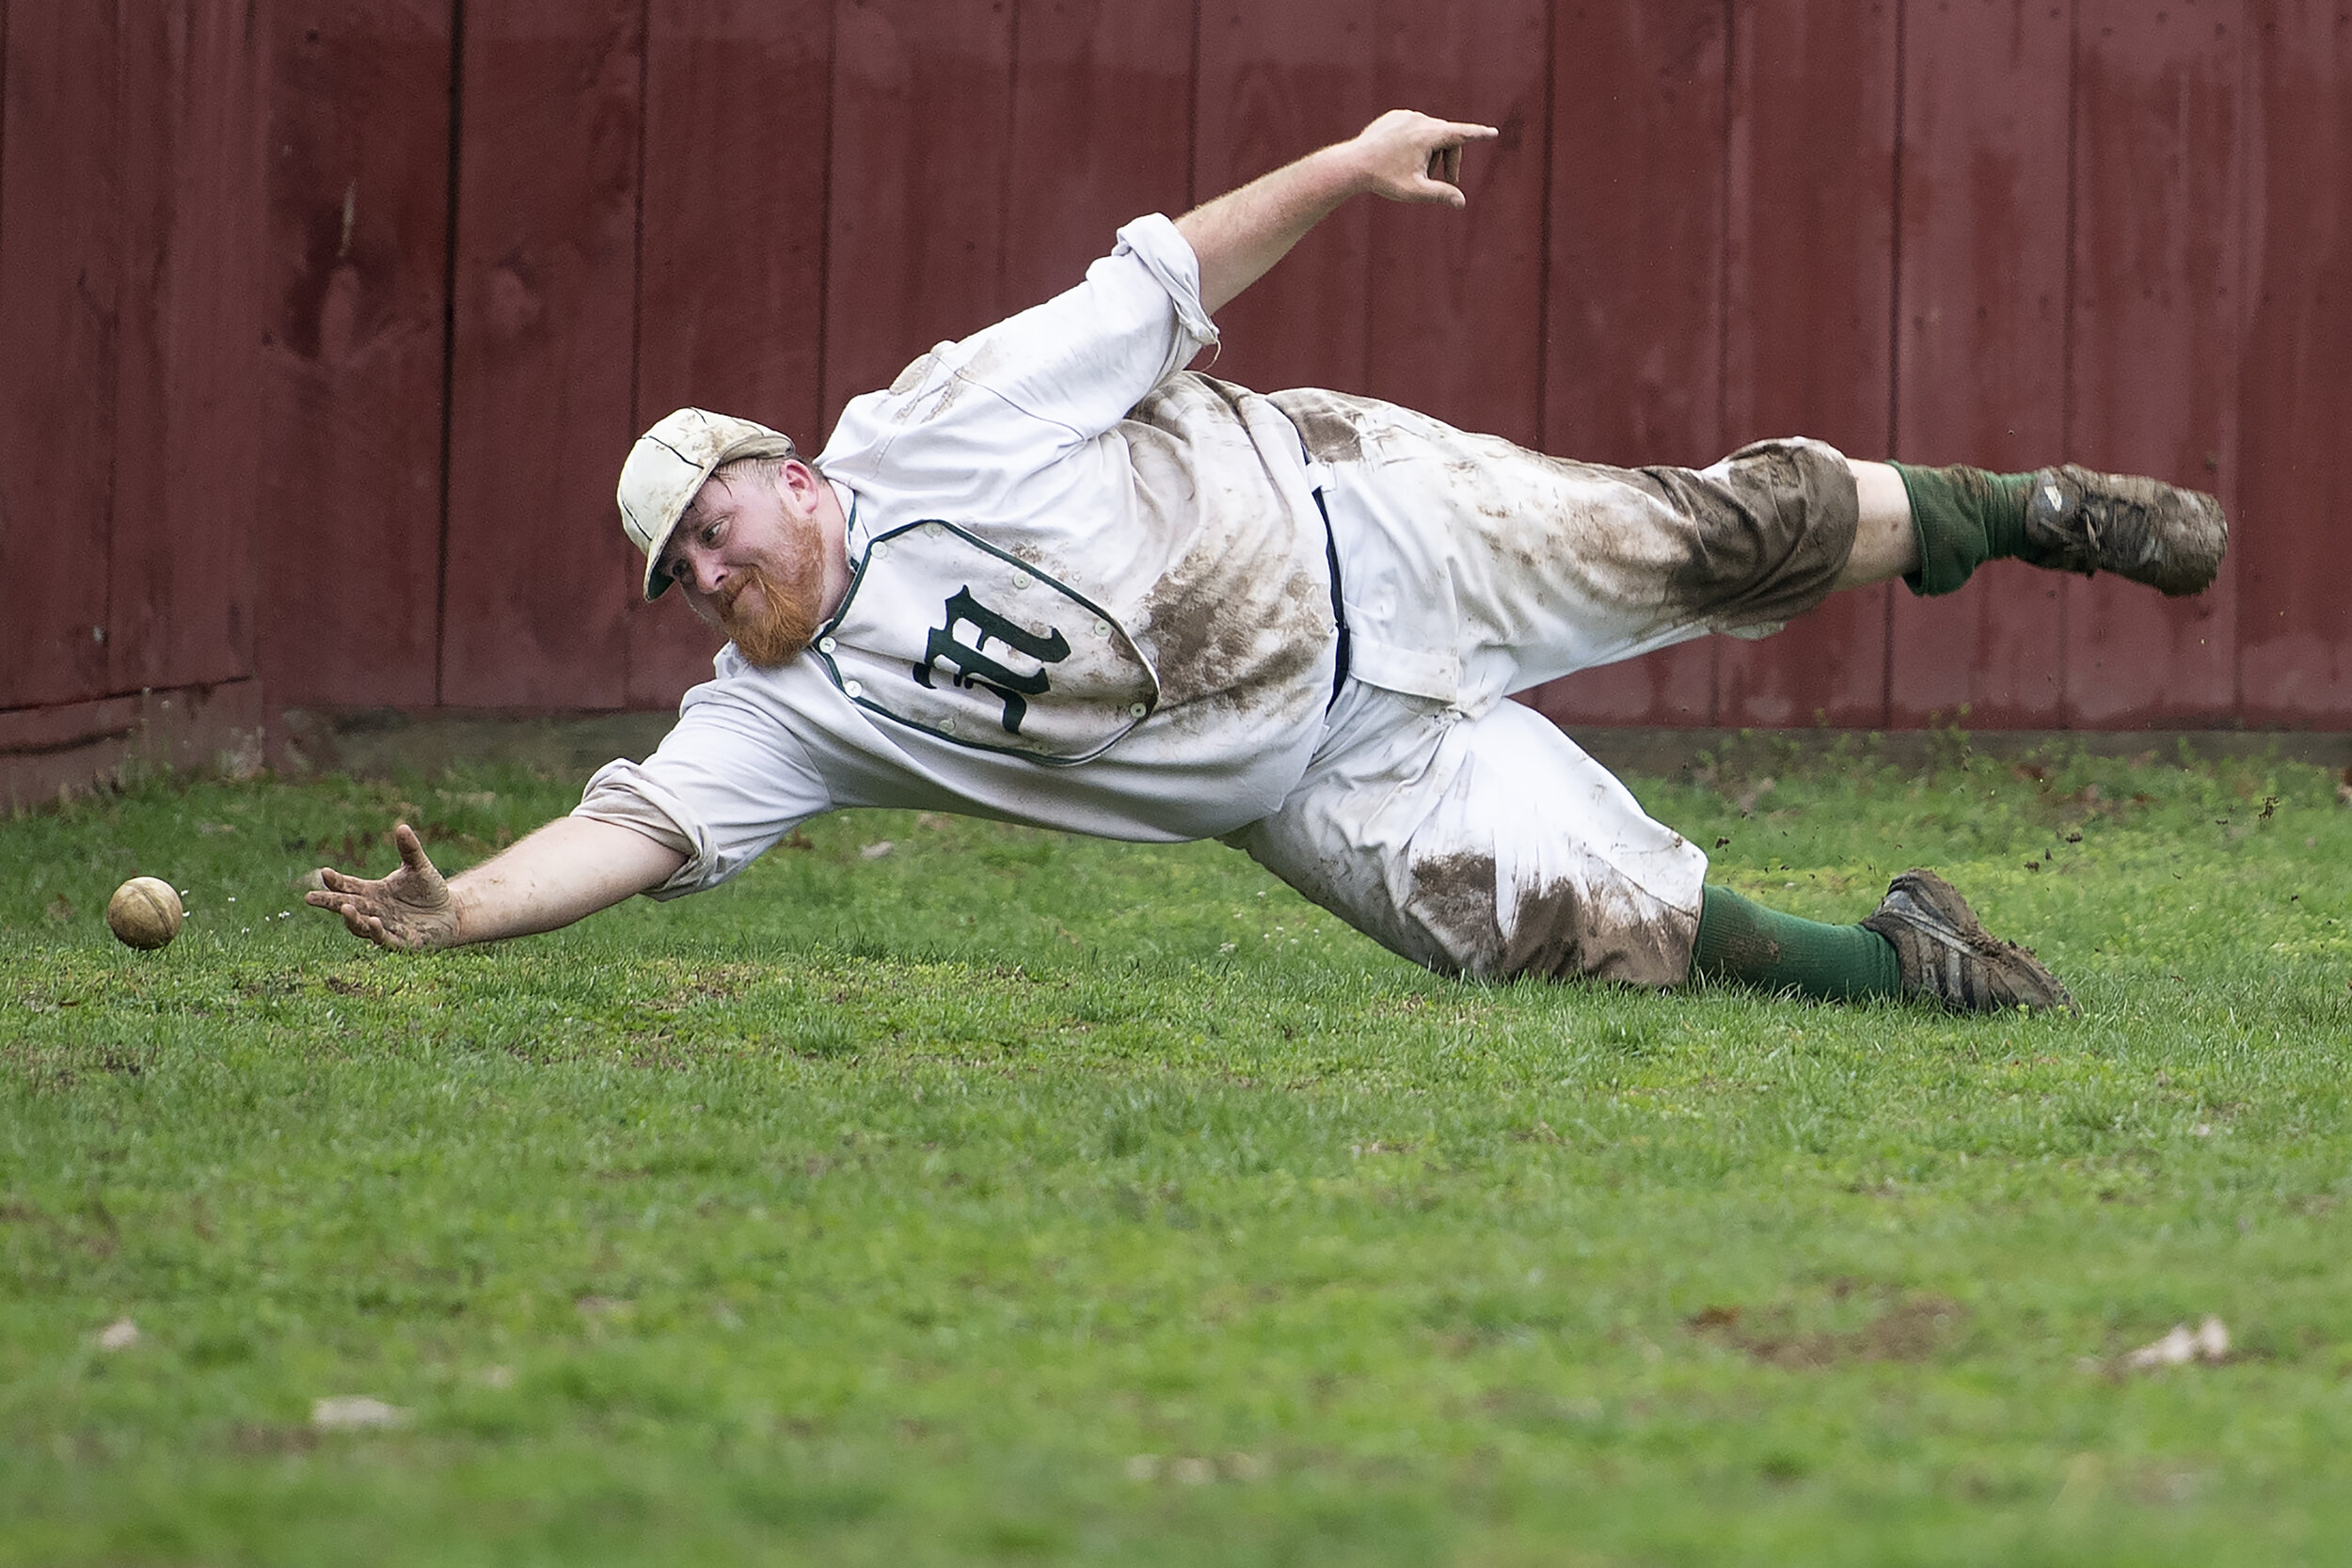  John Kreppel of the New York Mutuals attempts a diving catch at home plate during the game against the Brooklyn Atlantics at Old Bethpage Village Restoration on April 13, 2019 in Old Bethpage, NY. In 1864, players did not use baseball gloves and ins